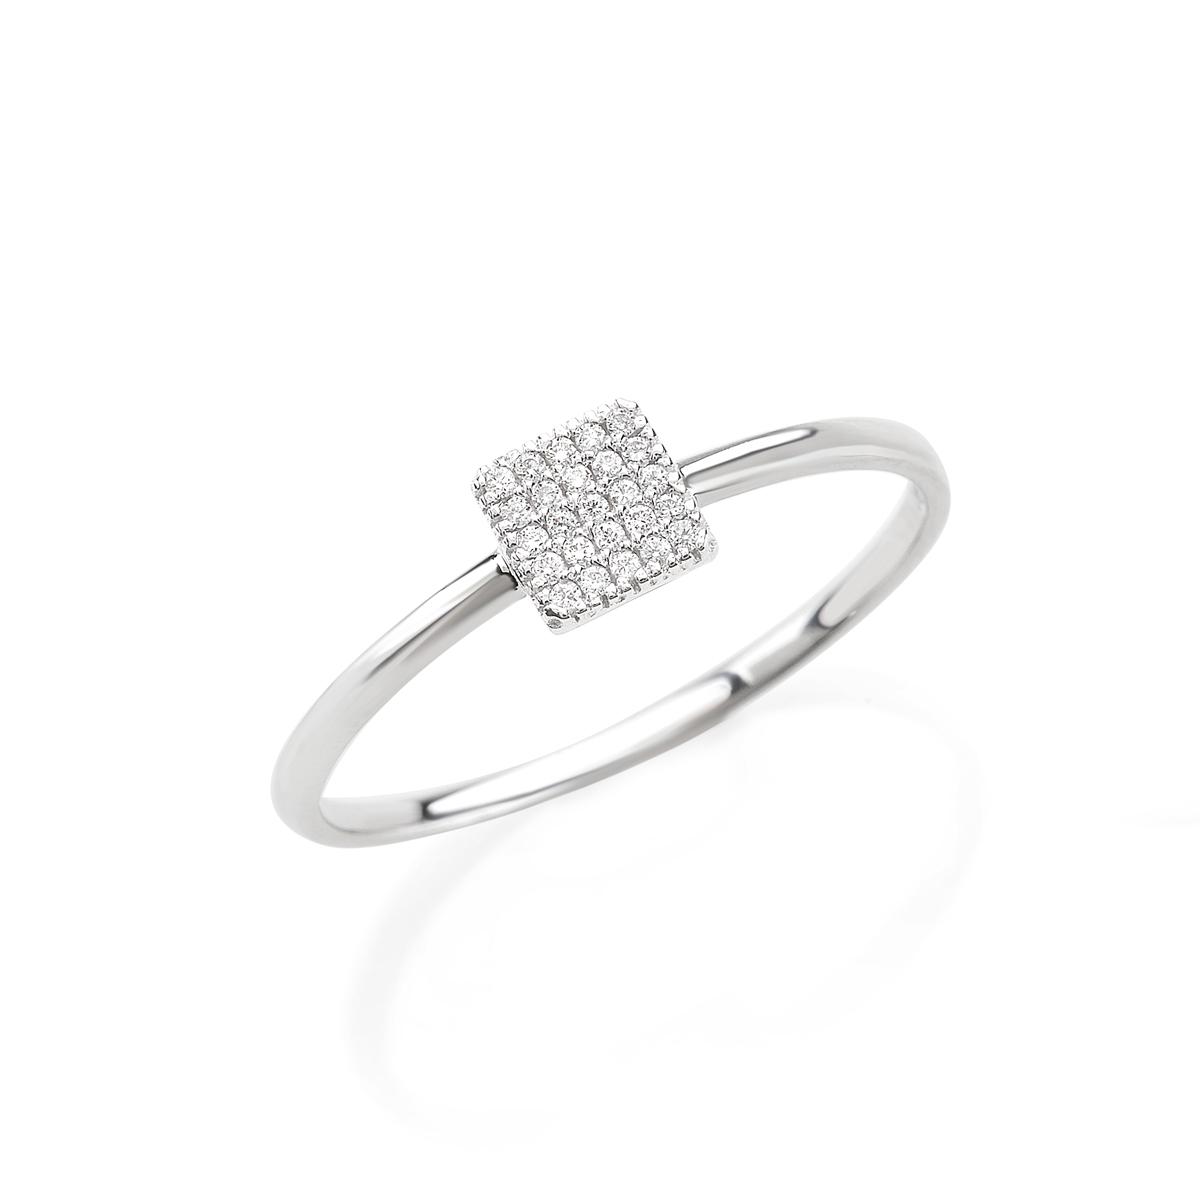 Square 18 kt white gold ring with pavé diamonds - AD705-LB